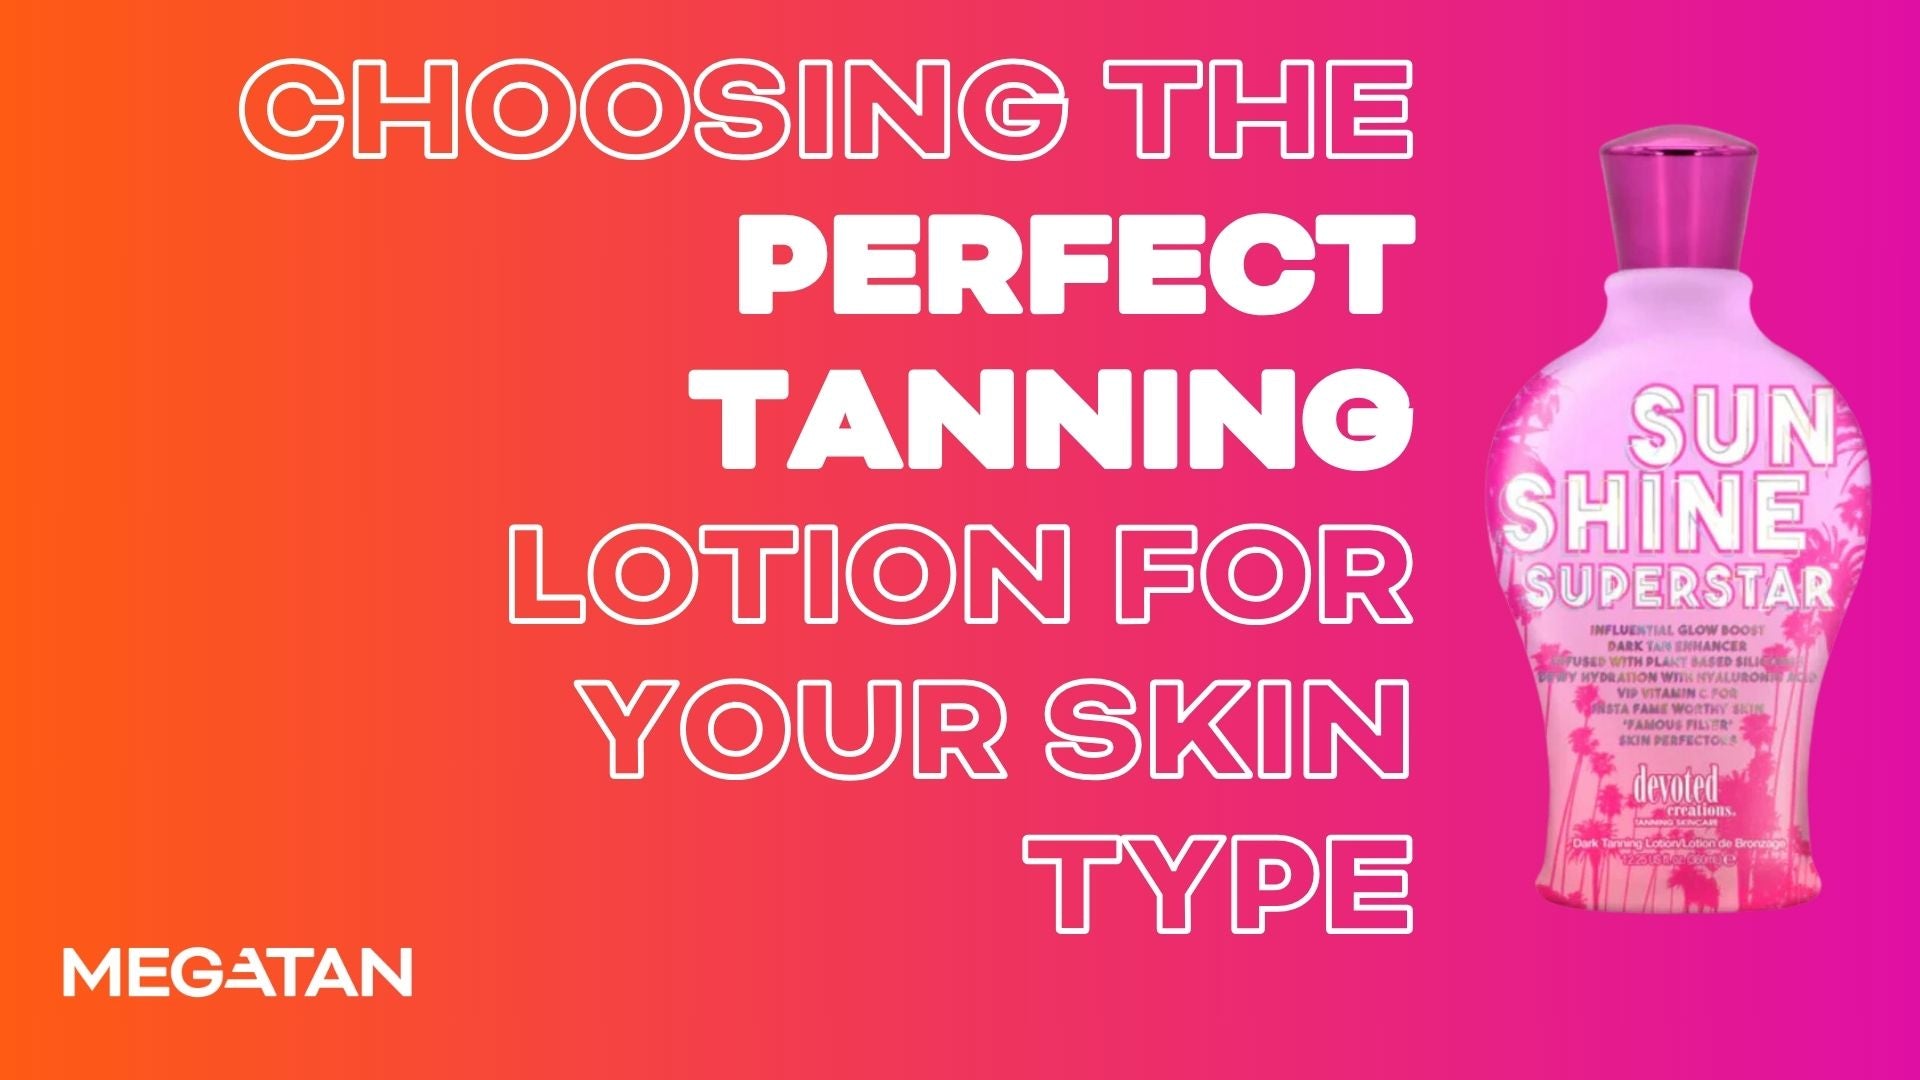 Choosing the Perfect Tanning Lotion for Your Skin Type